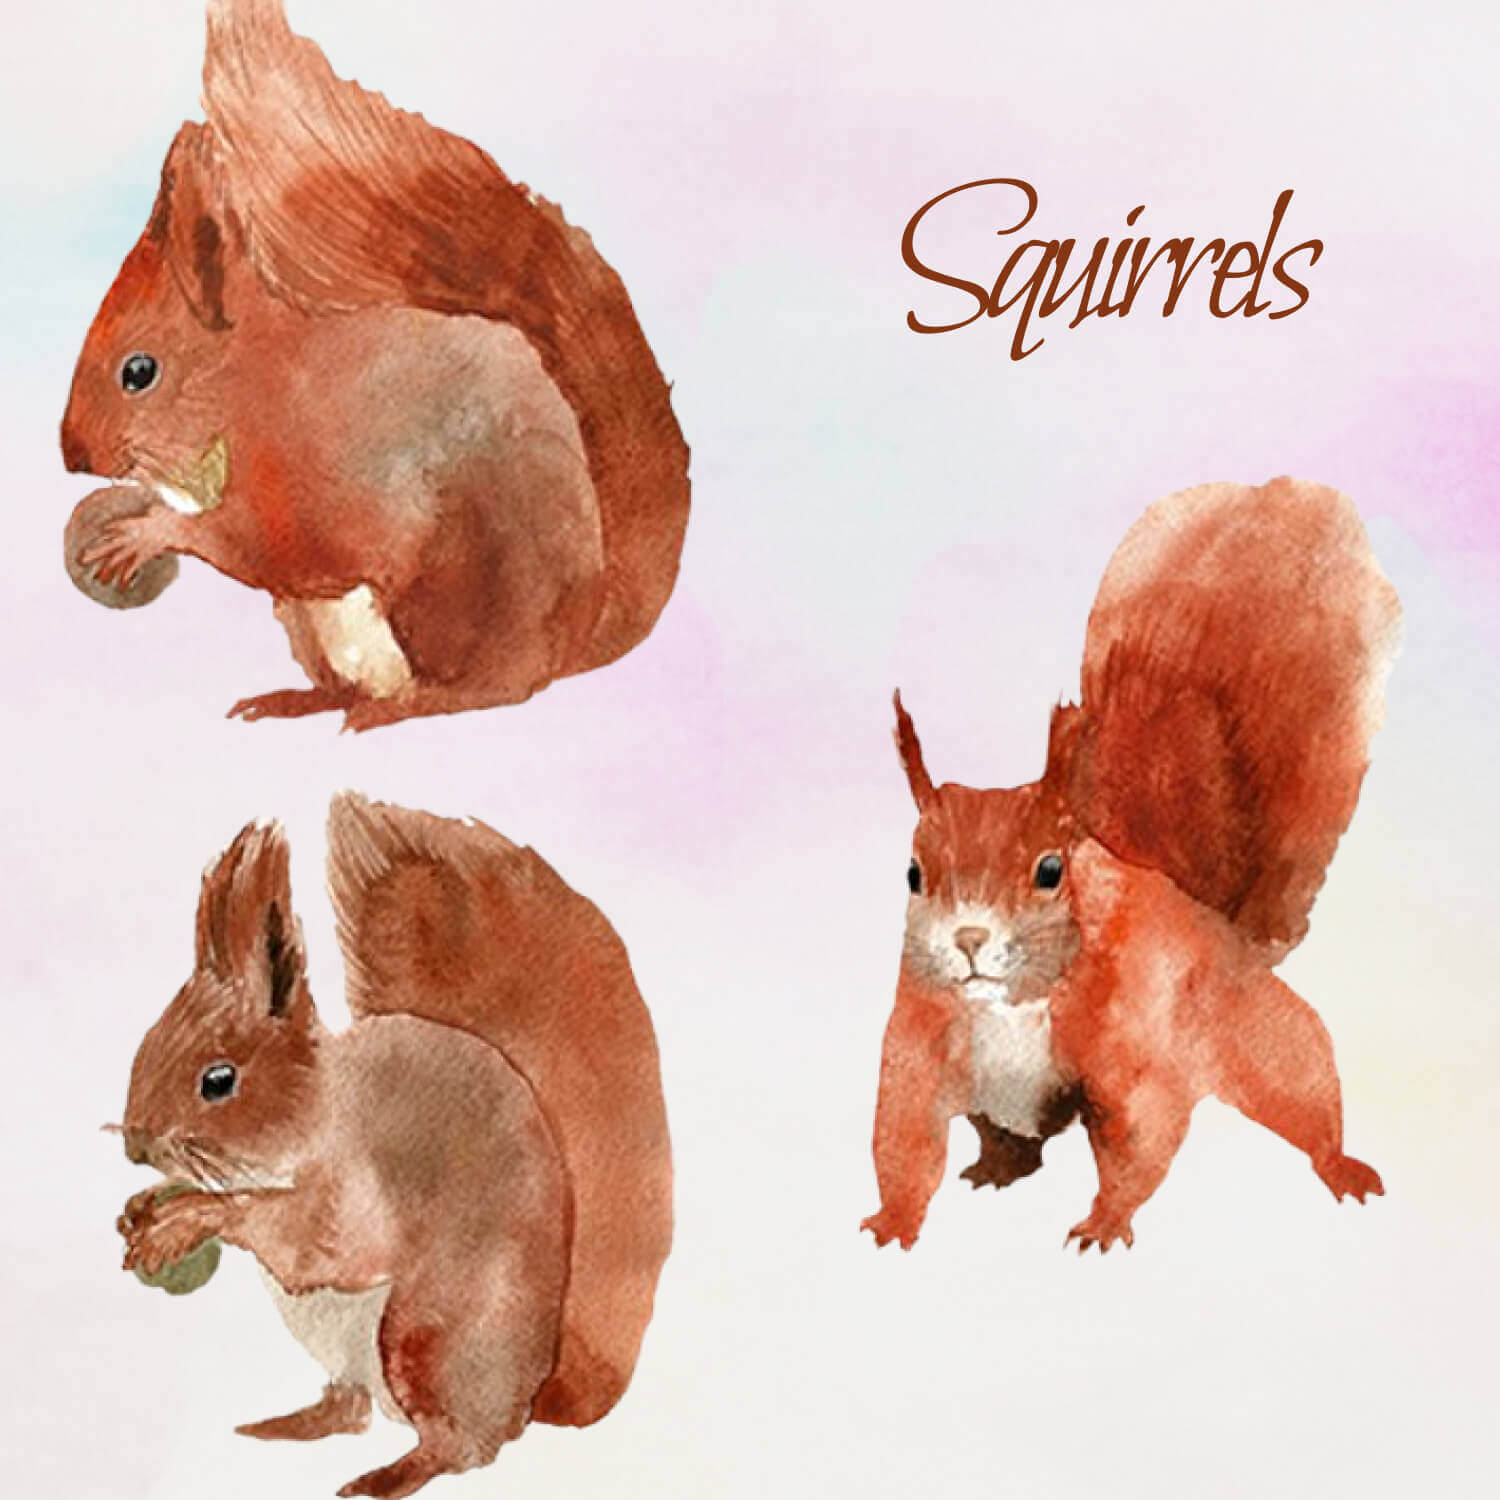 Squirrels with nuts painted in watercolor.